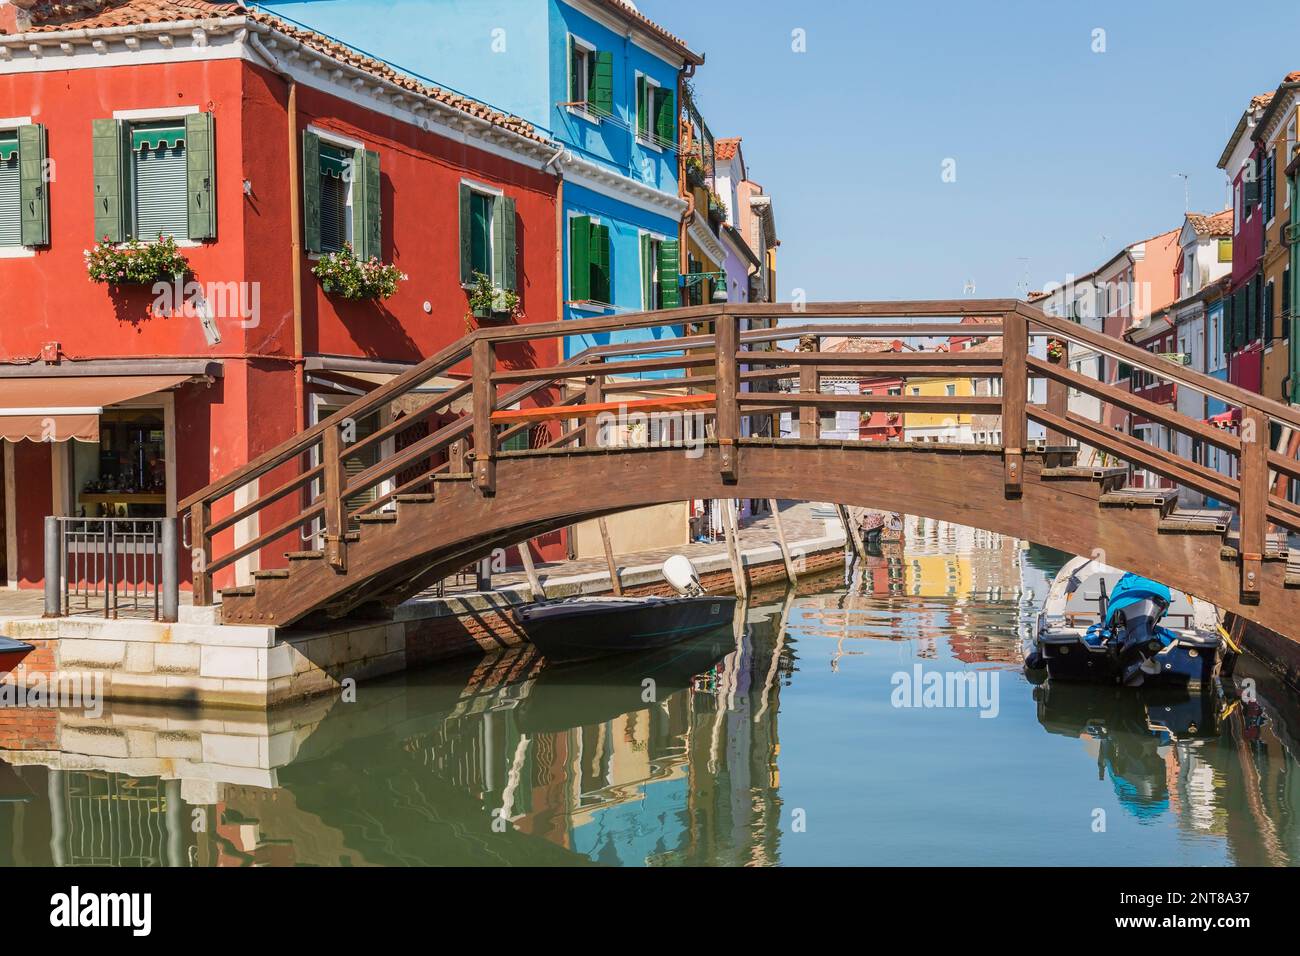 Brown wooden footbridge over canal with moored boats, red and blue stucco houses and storefronts, Burano Island, Venetian Lagoon, Venice, Italy. Stock Photo